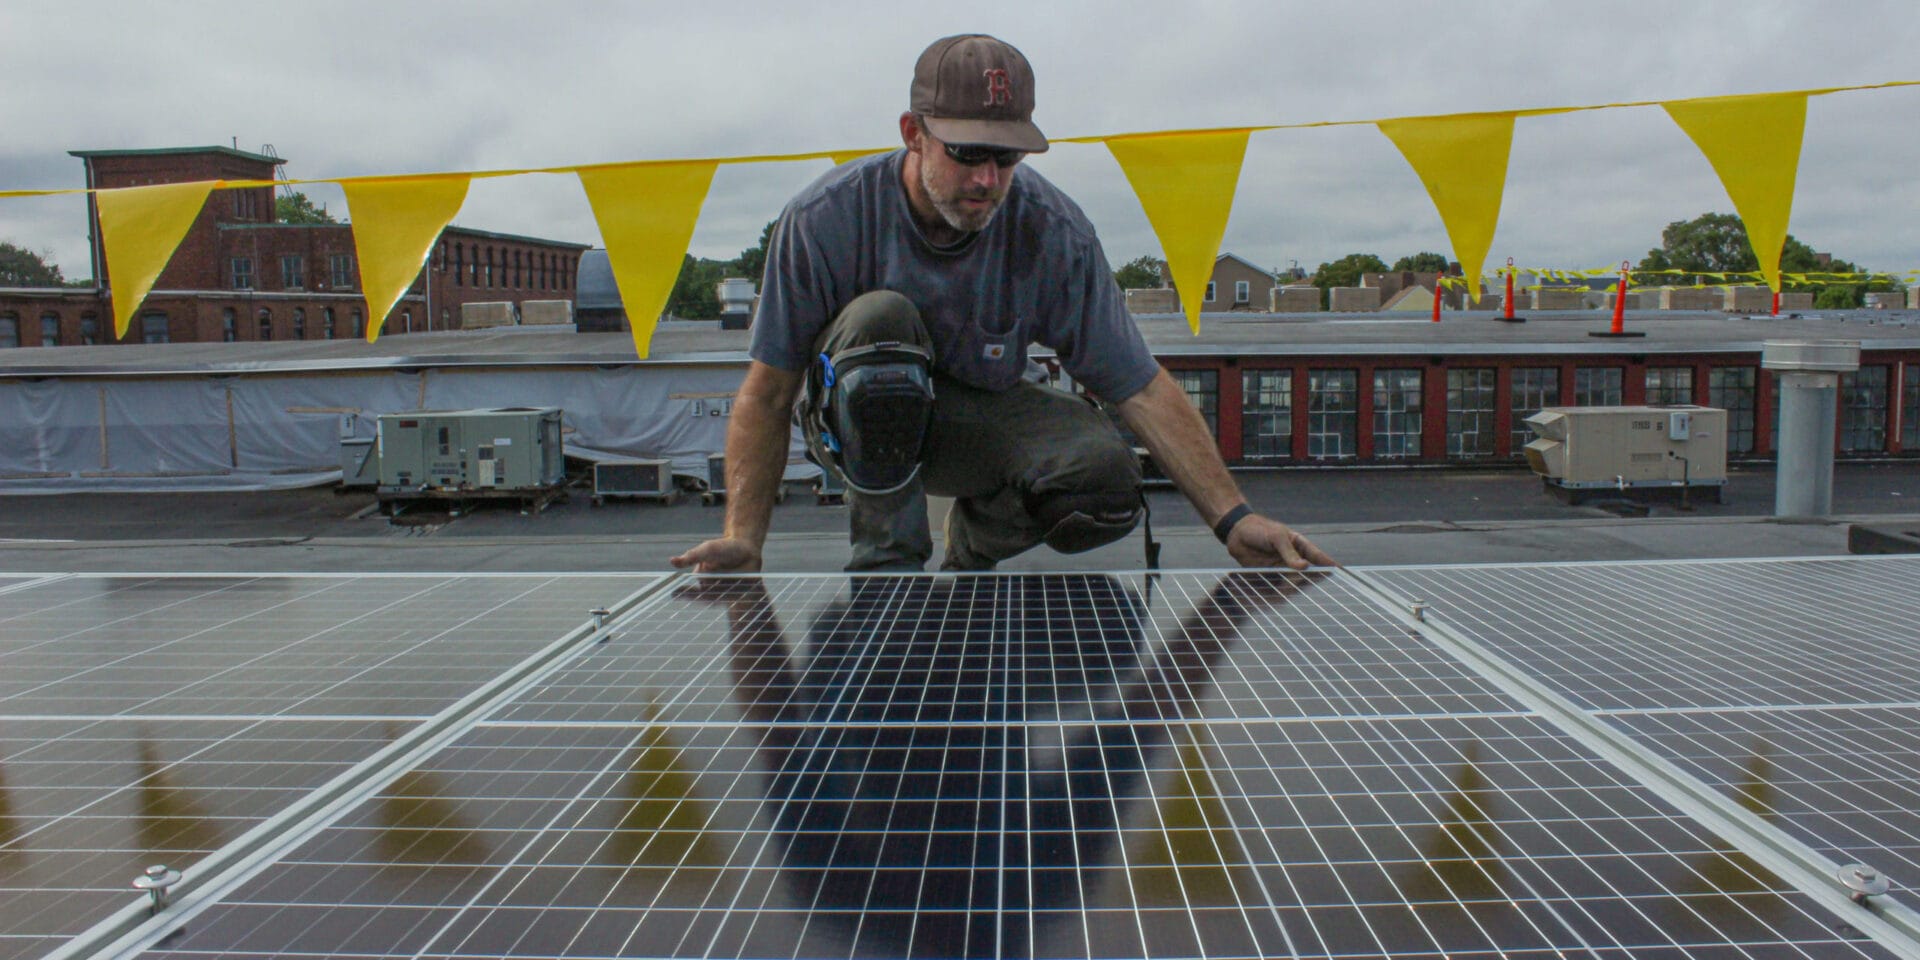 Pawtucket RI installation, featured in a news & industry trends blog about commercial solar and alternative energy